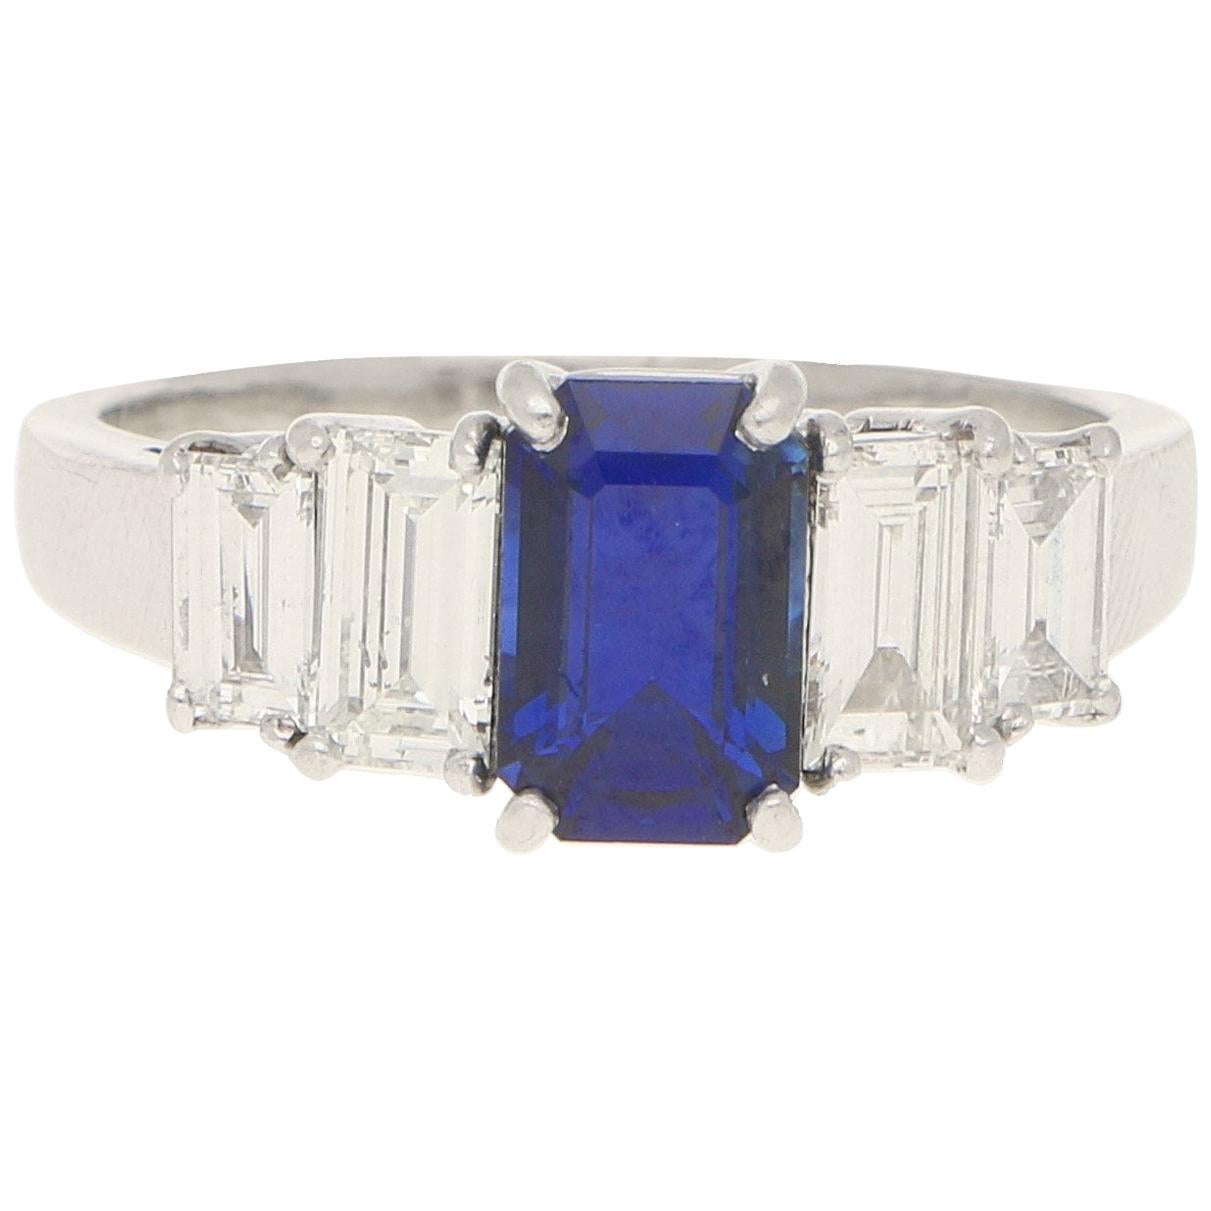 Royal Blue Sapphire and Diamond Five Stone Ring Set in Platinum